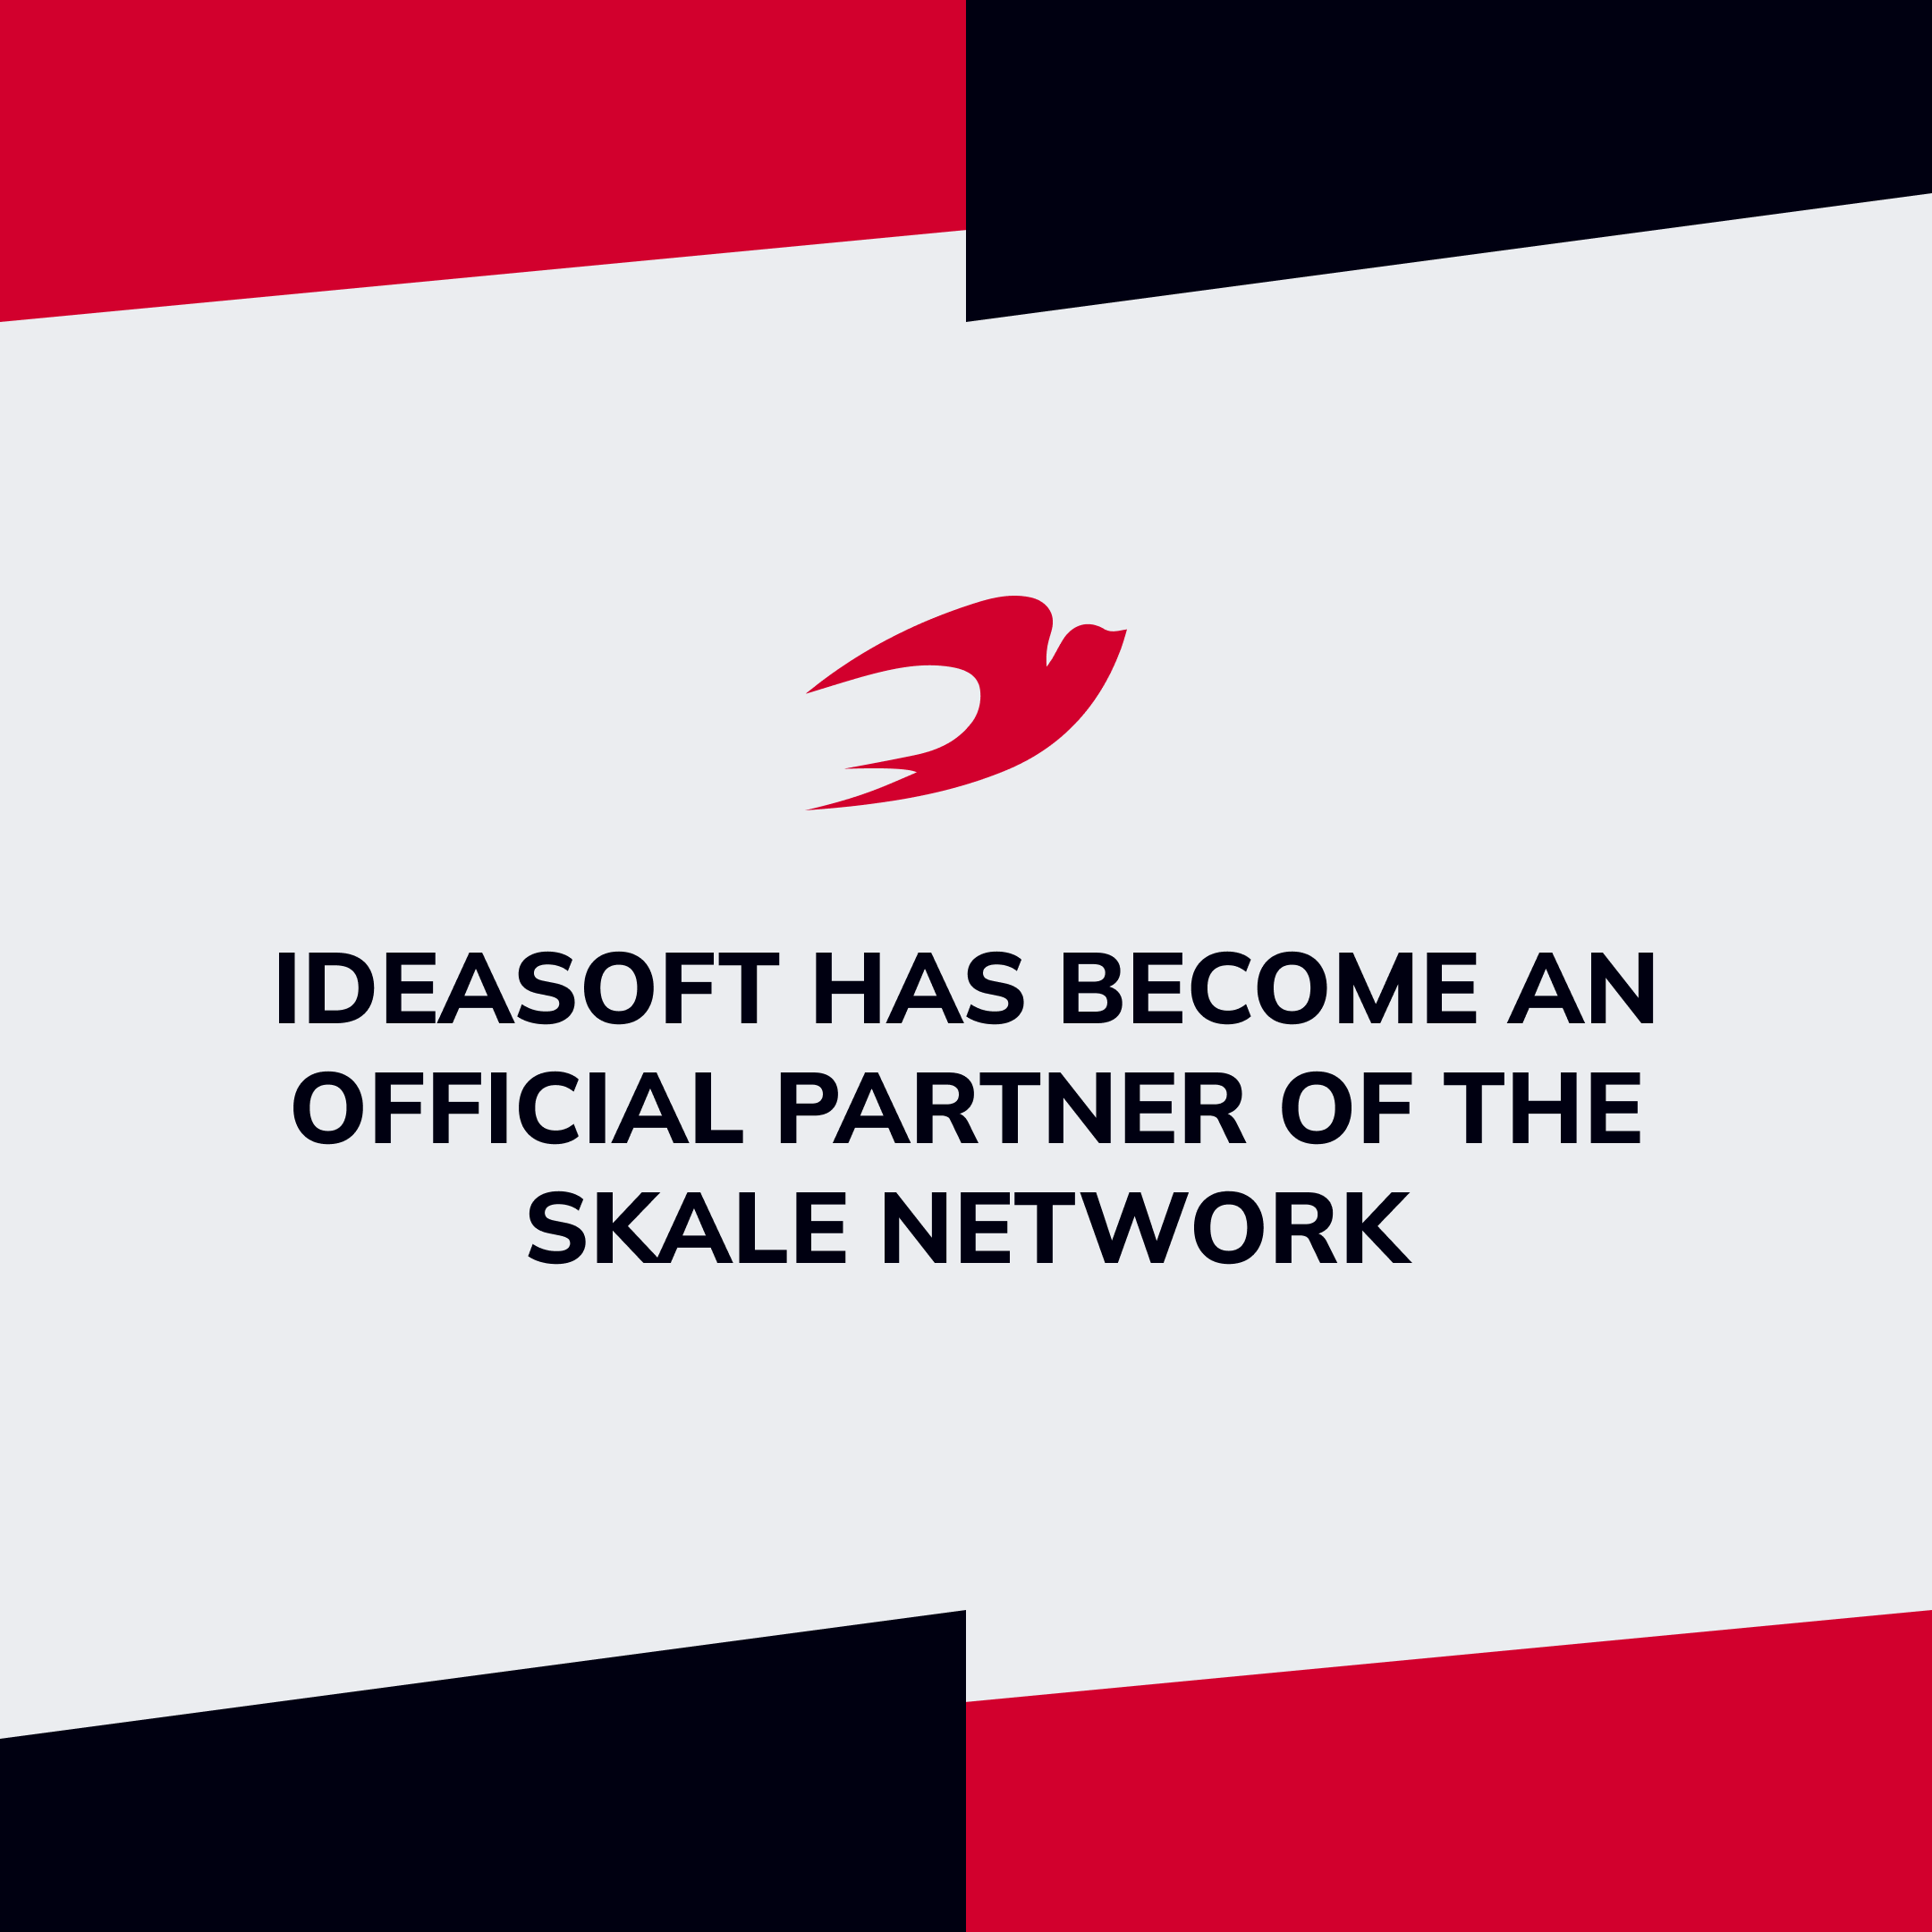 IdeaSoft Has Become an Official Partner of the SKALE Network